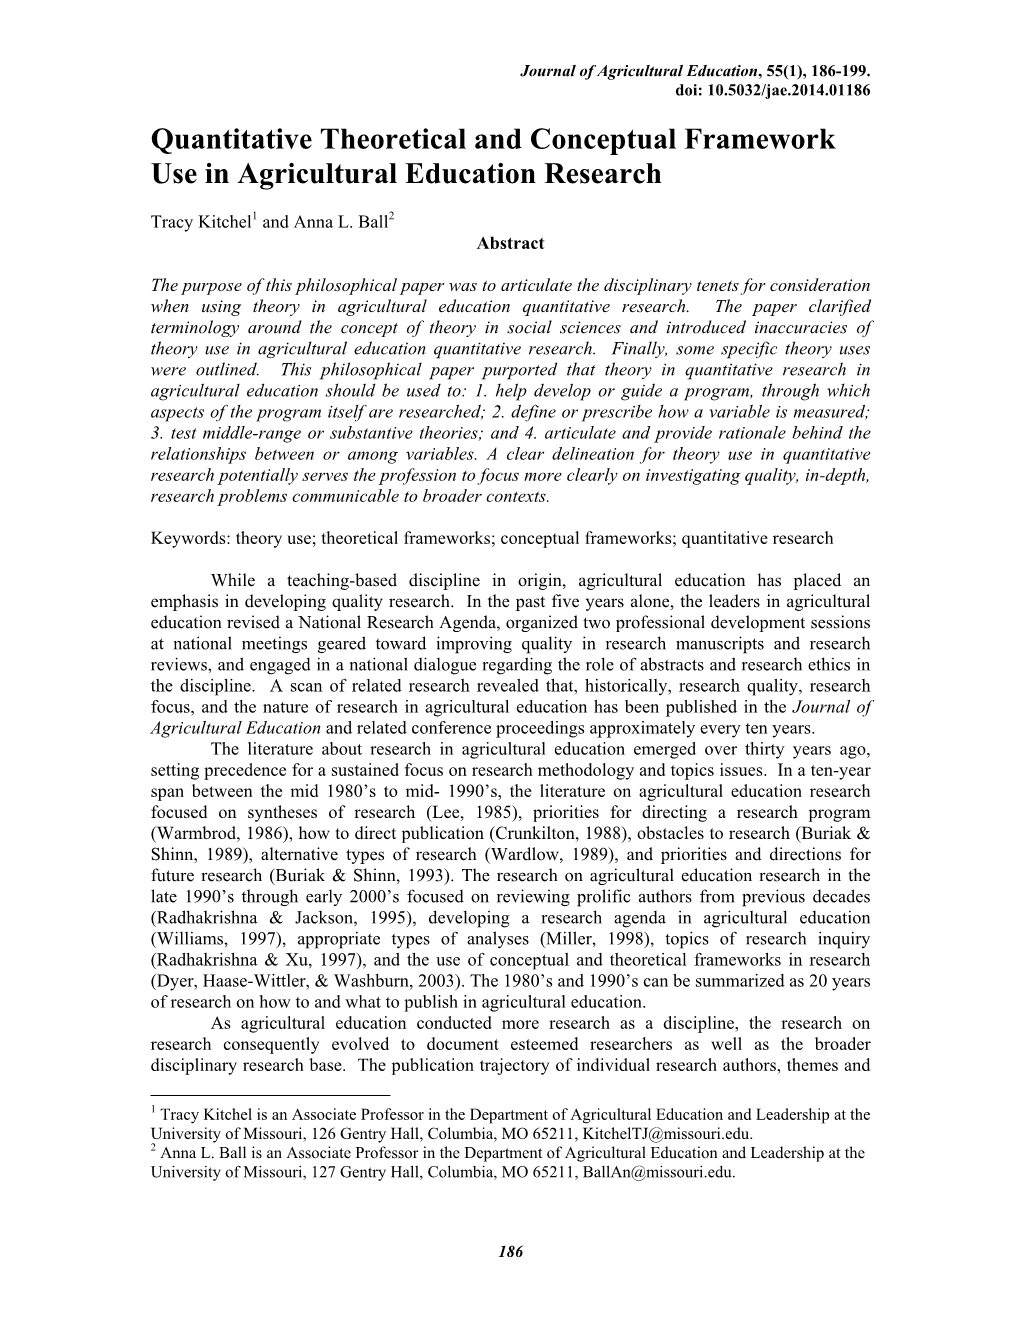 Quantitative Theoretical and Conceptual Framework Use in Agricultural Education Research